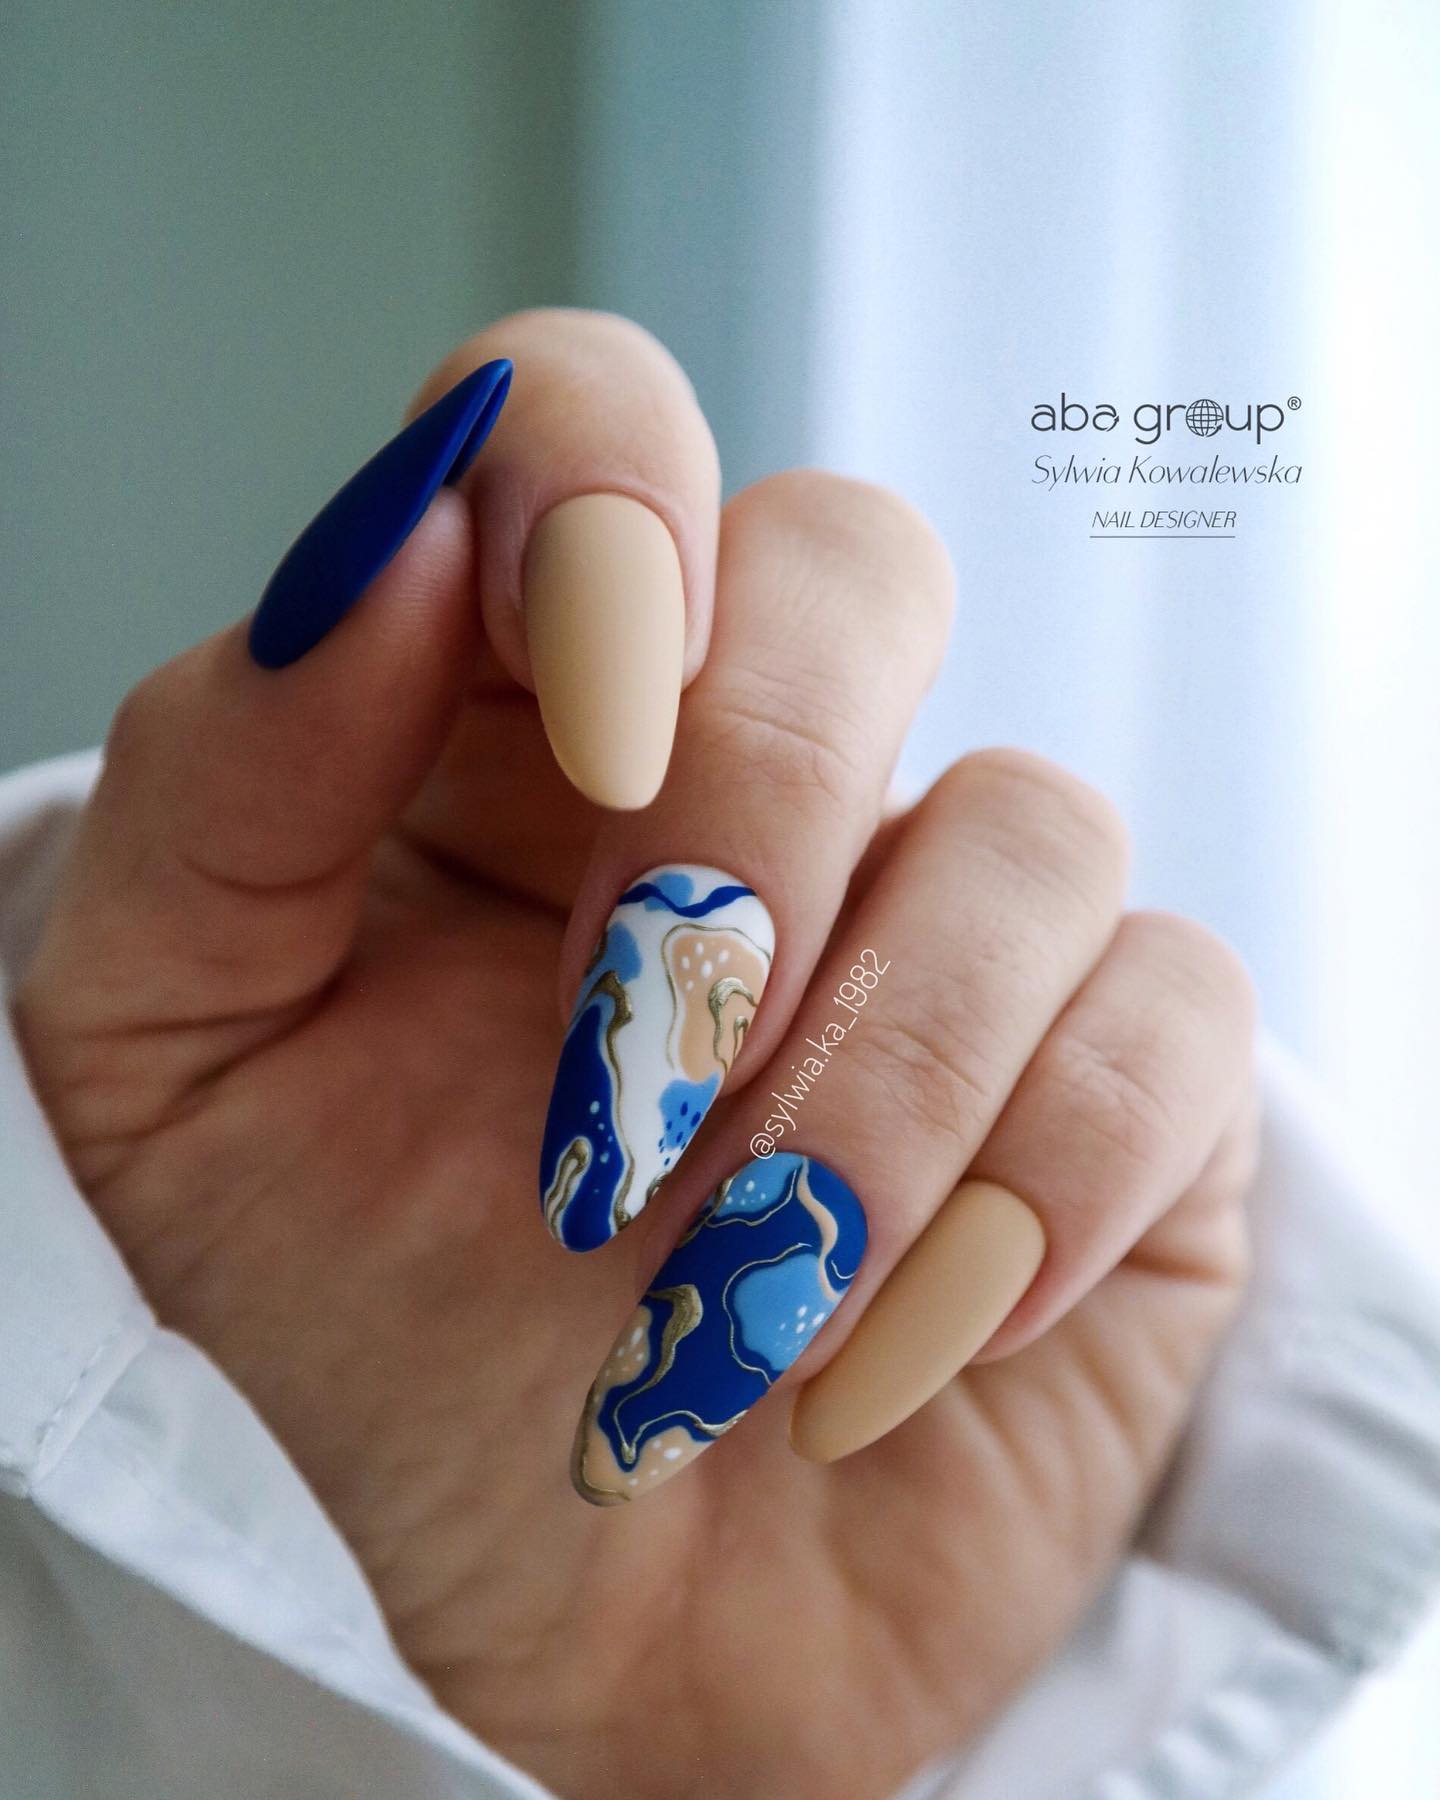 Abstract nail designs are bolder than other designs because of their creative art. They are customizable according to your mood. The matte nails above feature a great color combo of beige and dark blue with abstract nails which are decorated with abstract art.